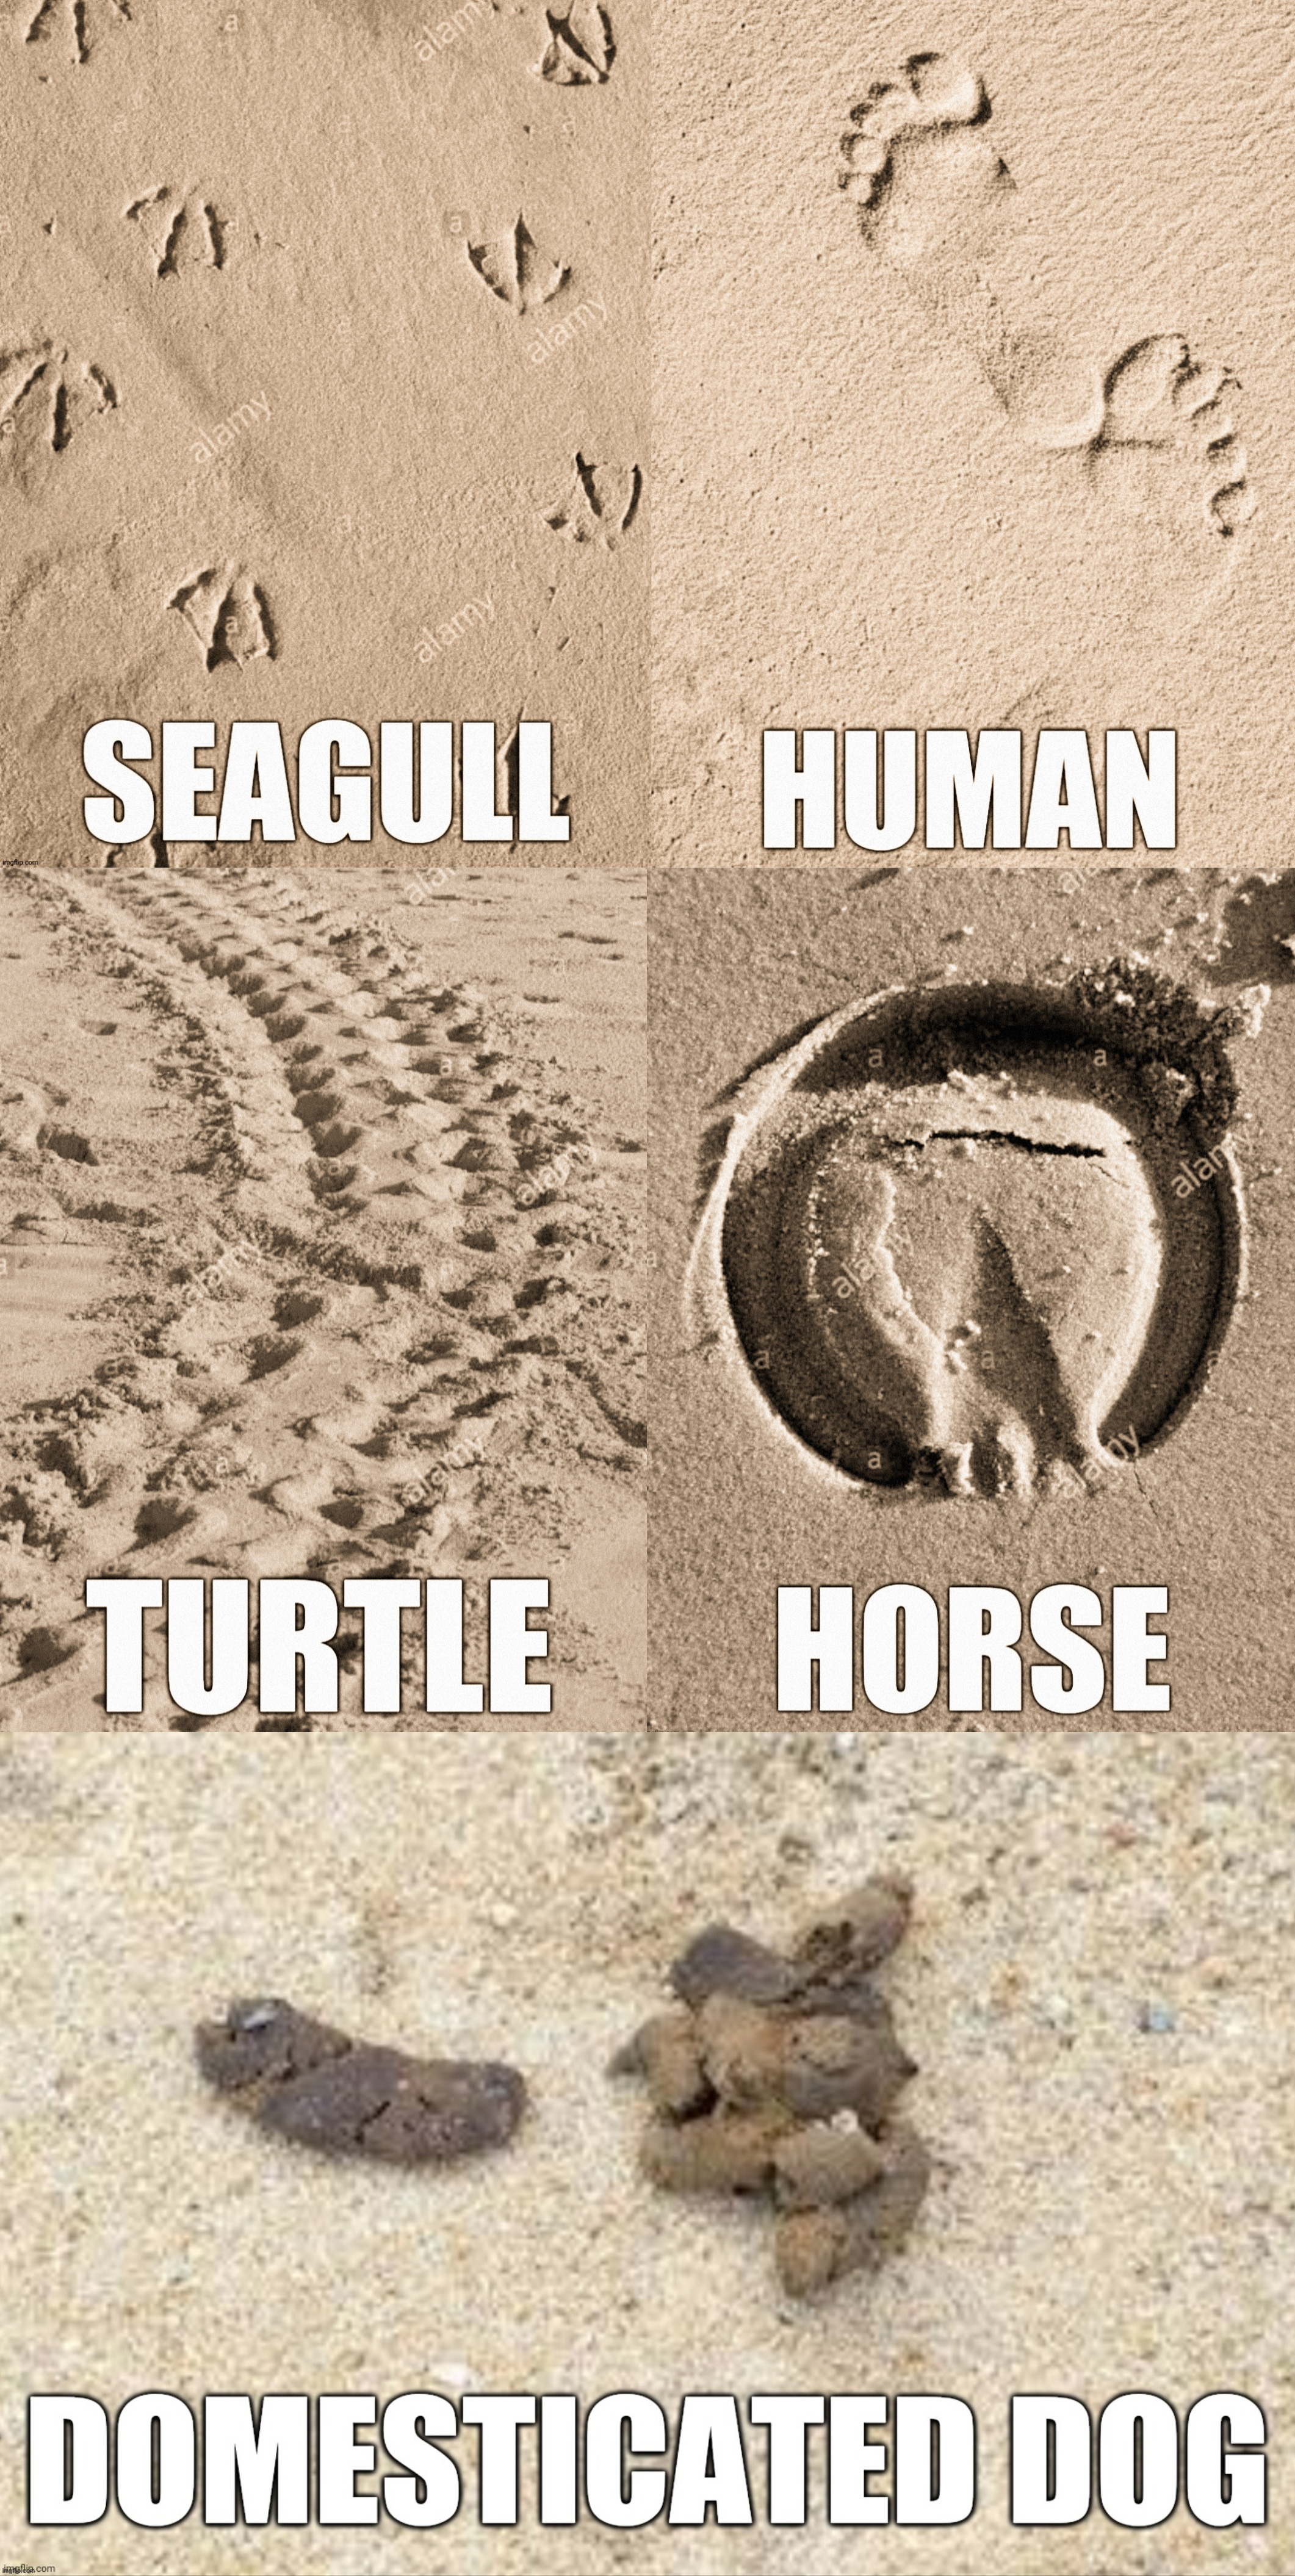 What did they left on beaches? | image tagged in dogs,beach,footprints,human,animals,sand | made w/ Imgflip meme maker